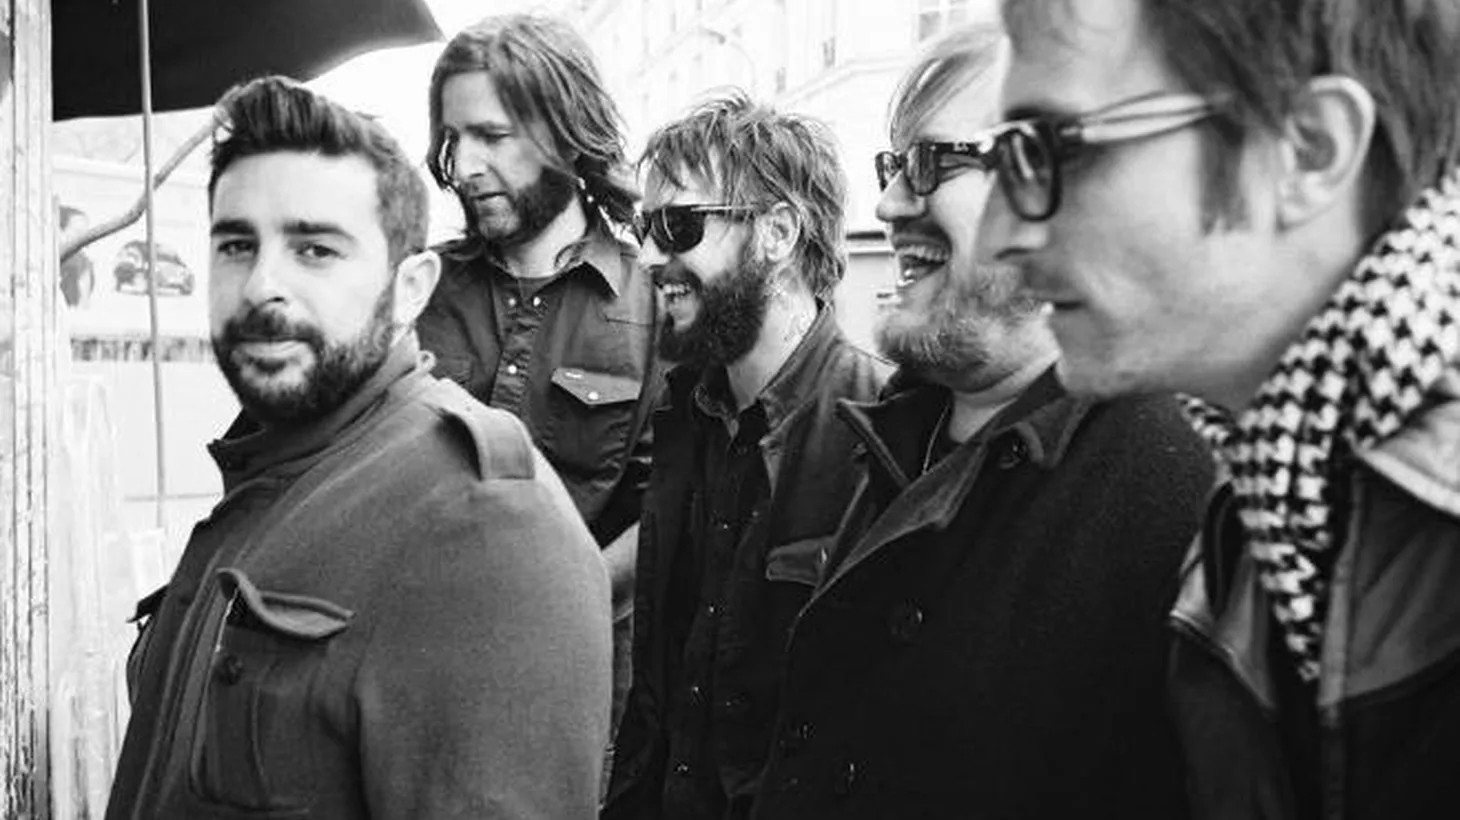 Band of Horses have always been a station favorite but they took their sound to the next level on their latest release "Infinite Arms" as they travel through Americana and dewy pop songs. Morning Becomes Eclectic listeners will be treated to a live performance when the band returns at 11:15am.